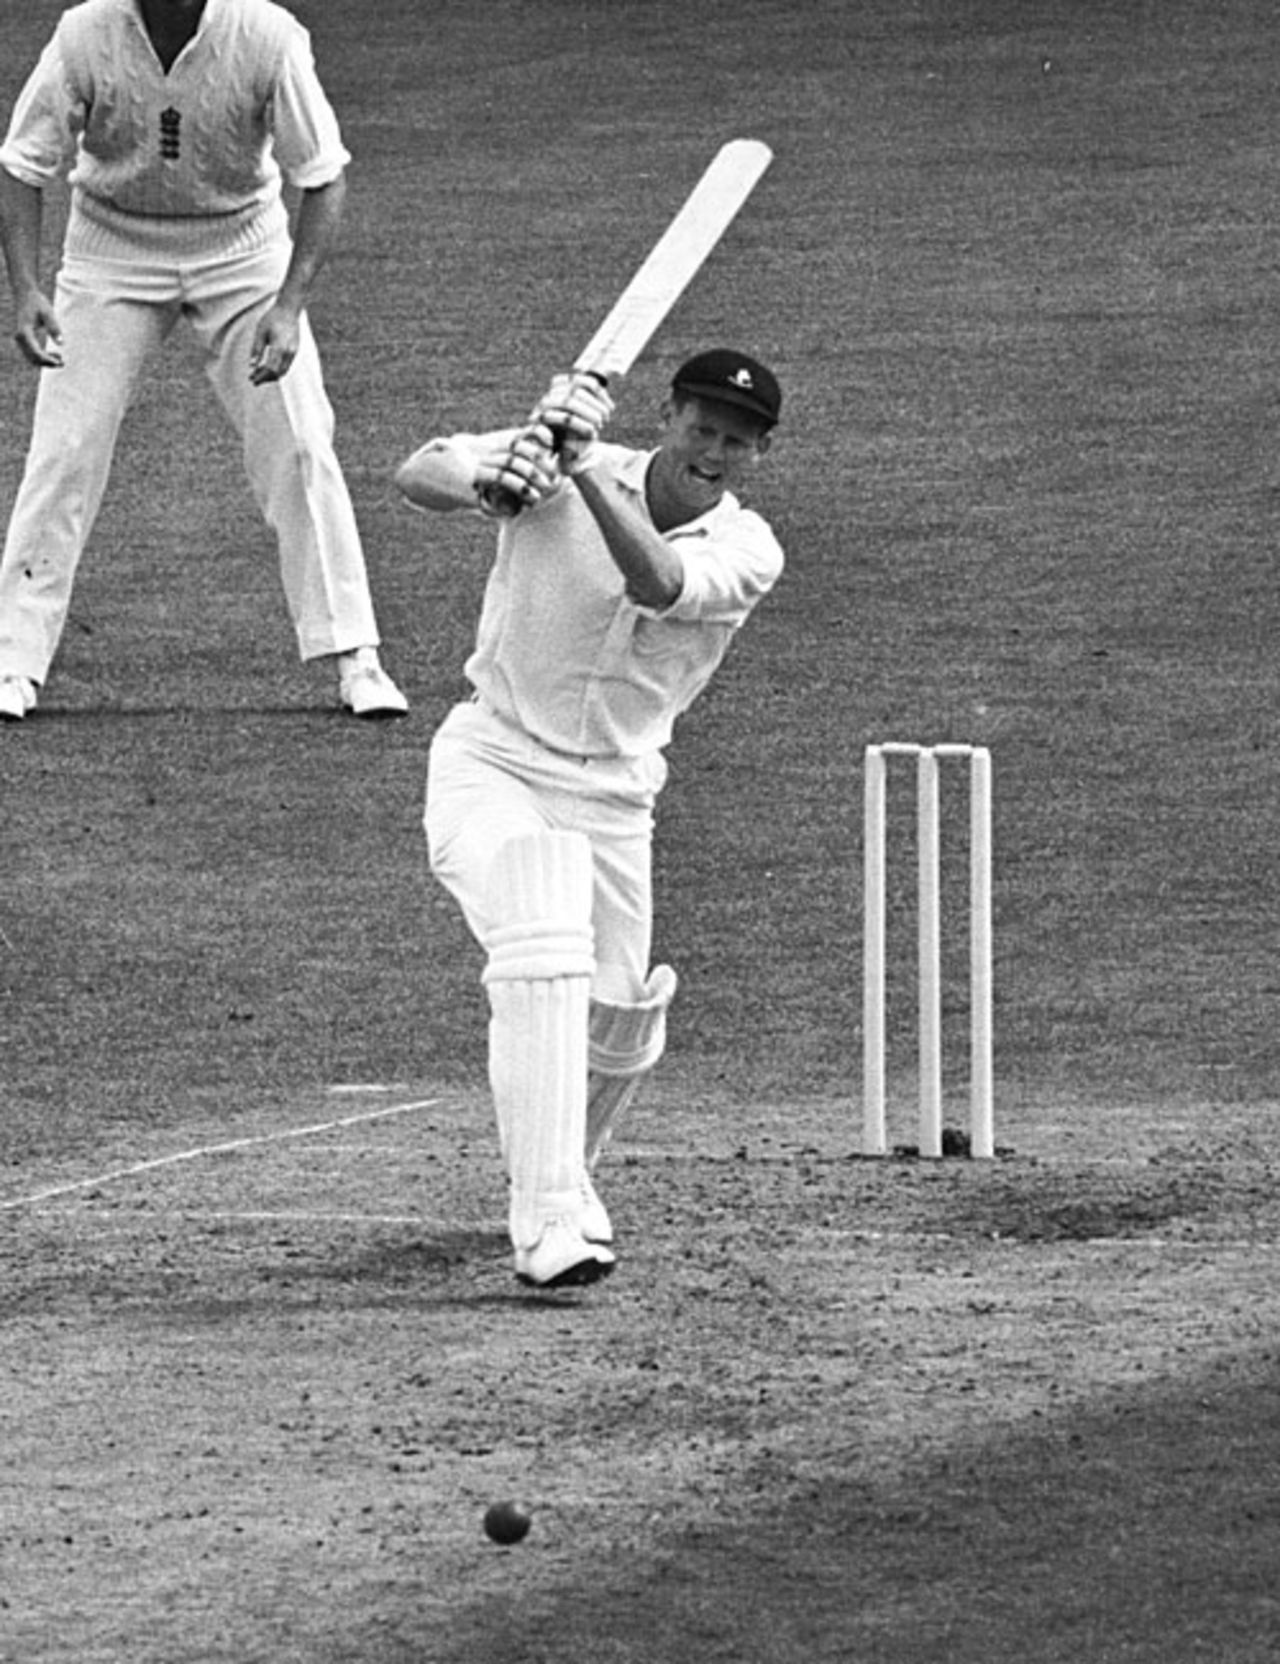 Graeme Pollock drives on his way to 125, England v South Africa, 2nd Test, Trent Bridge, 1st day, August 5, 1965